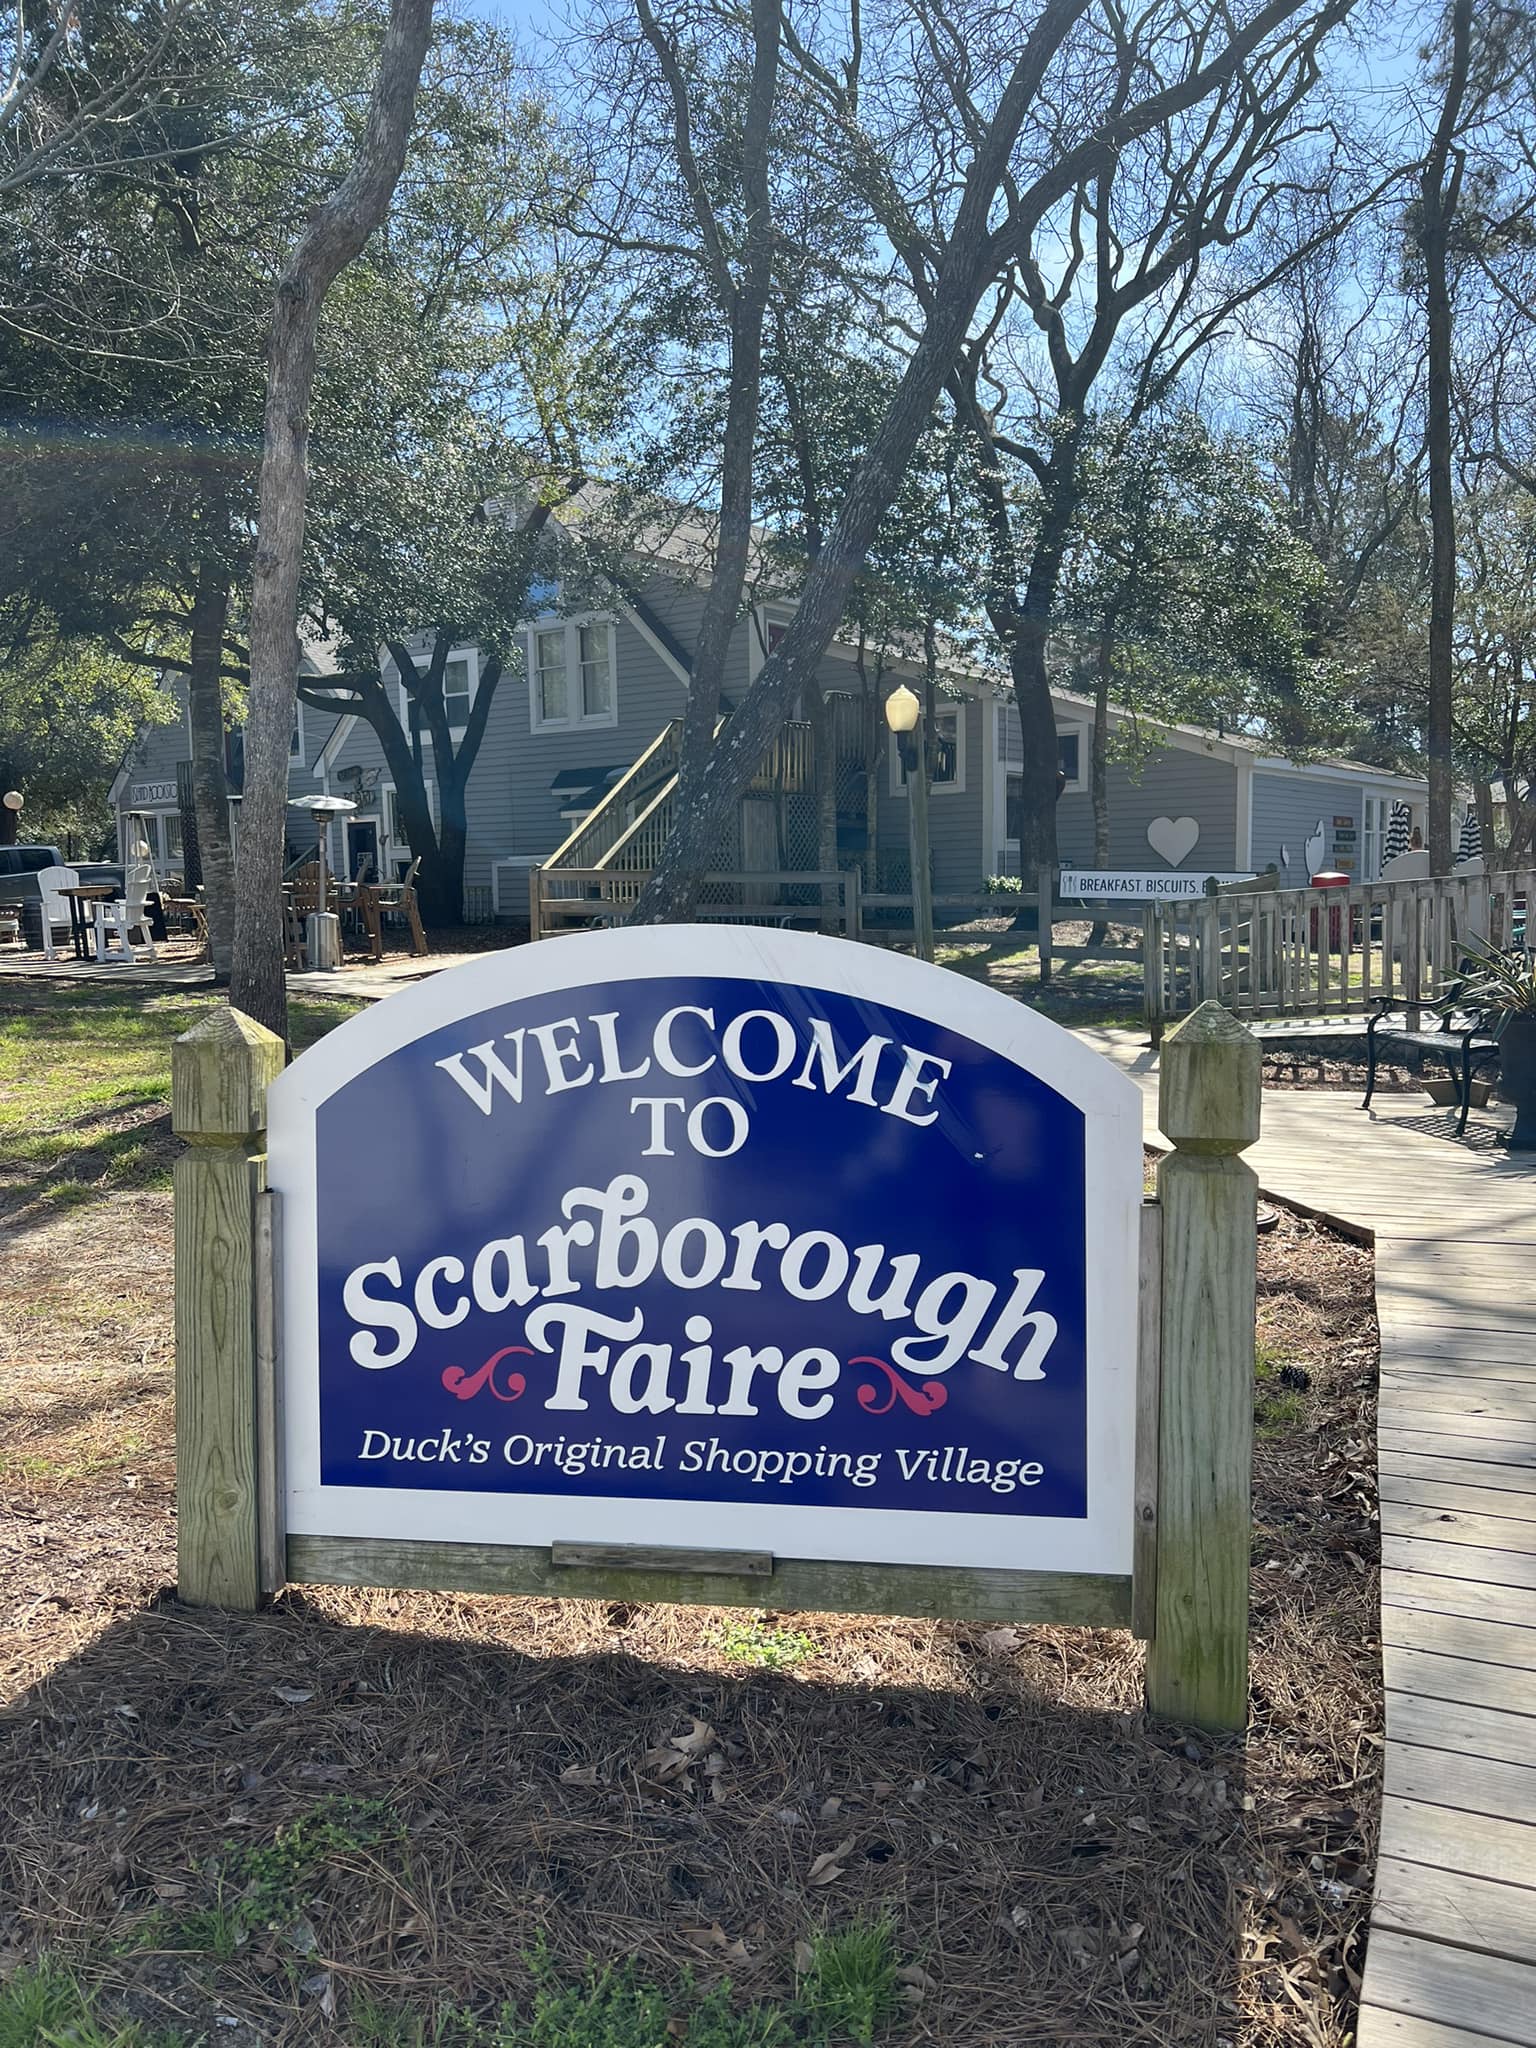 Scarborough Faire Shopping Village in Duck, NC